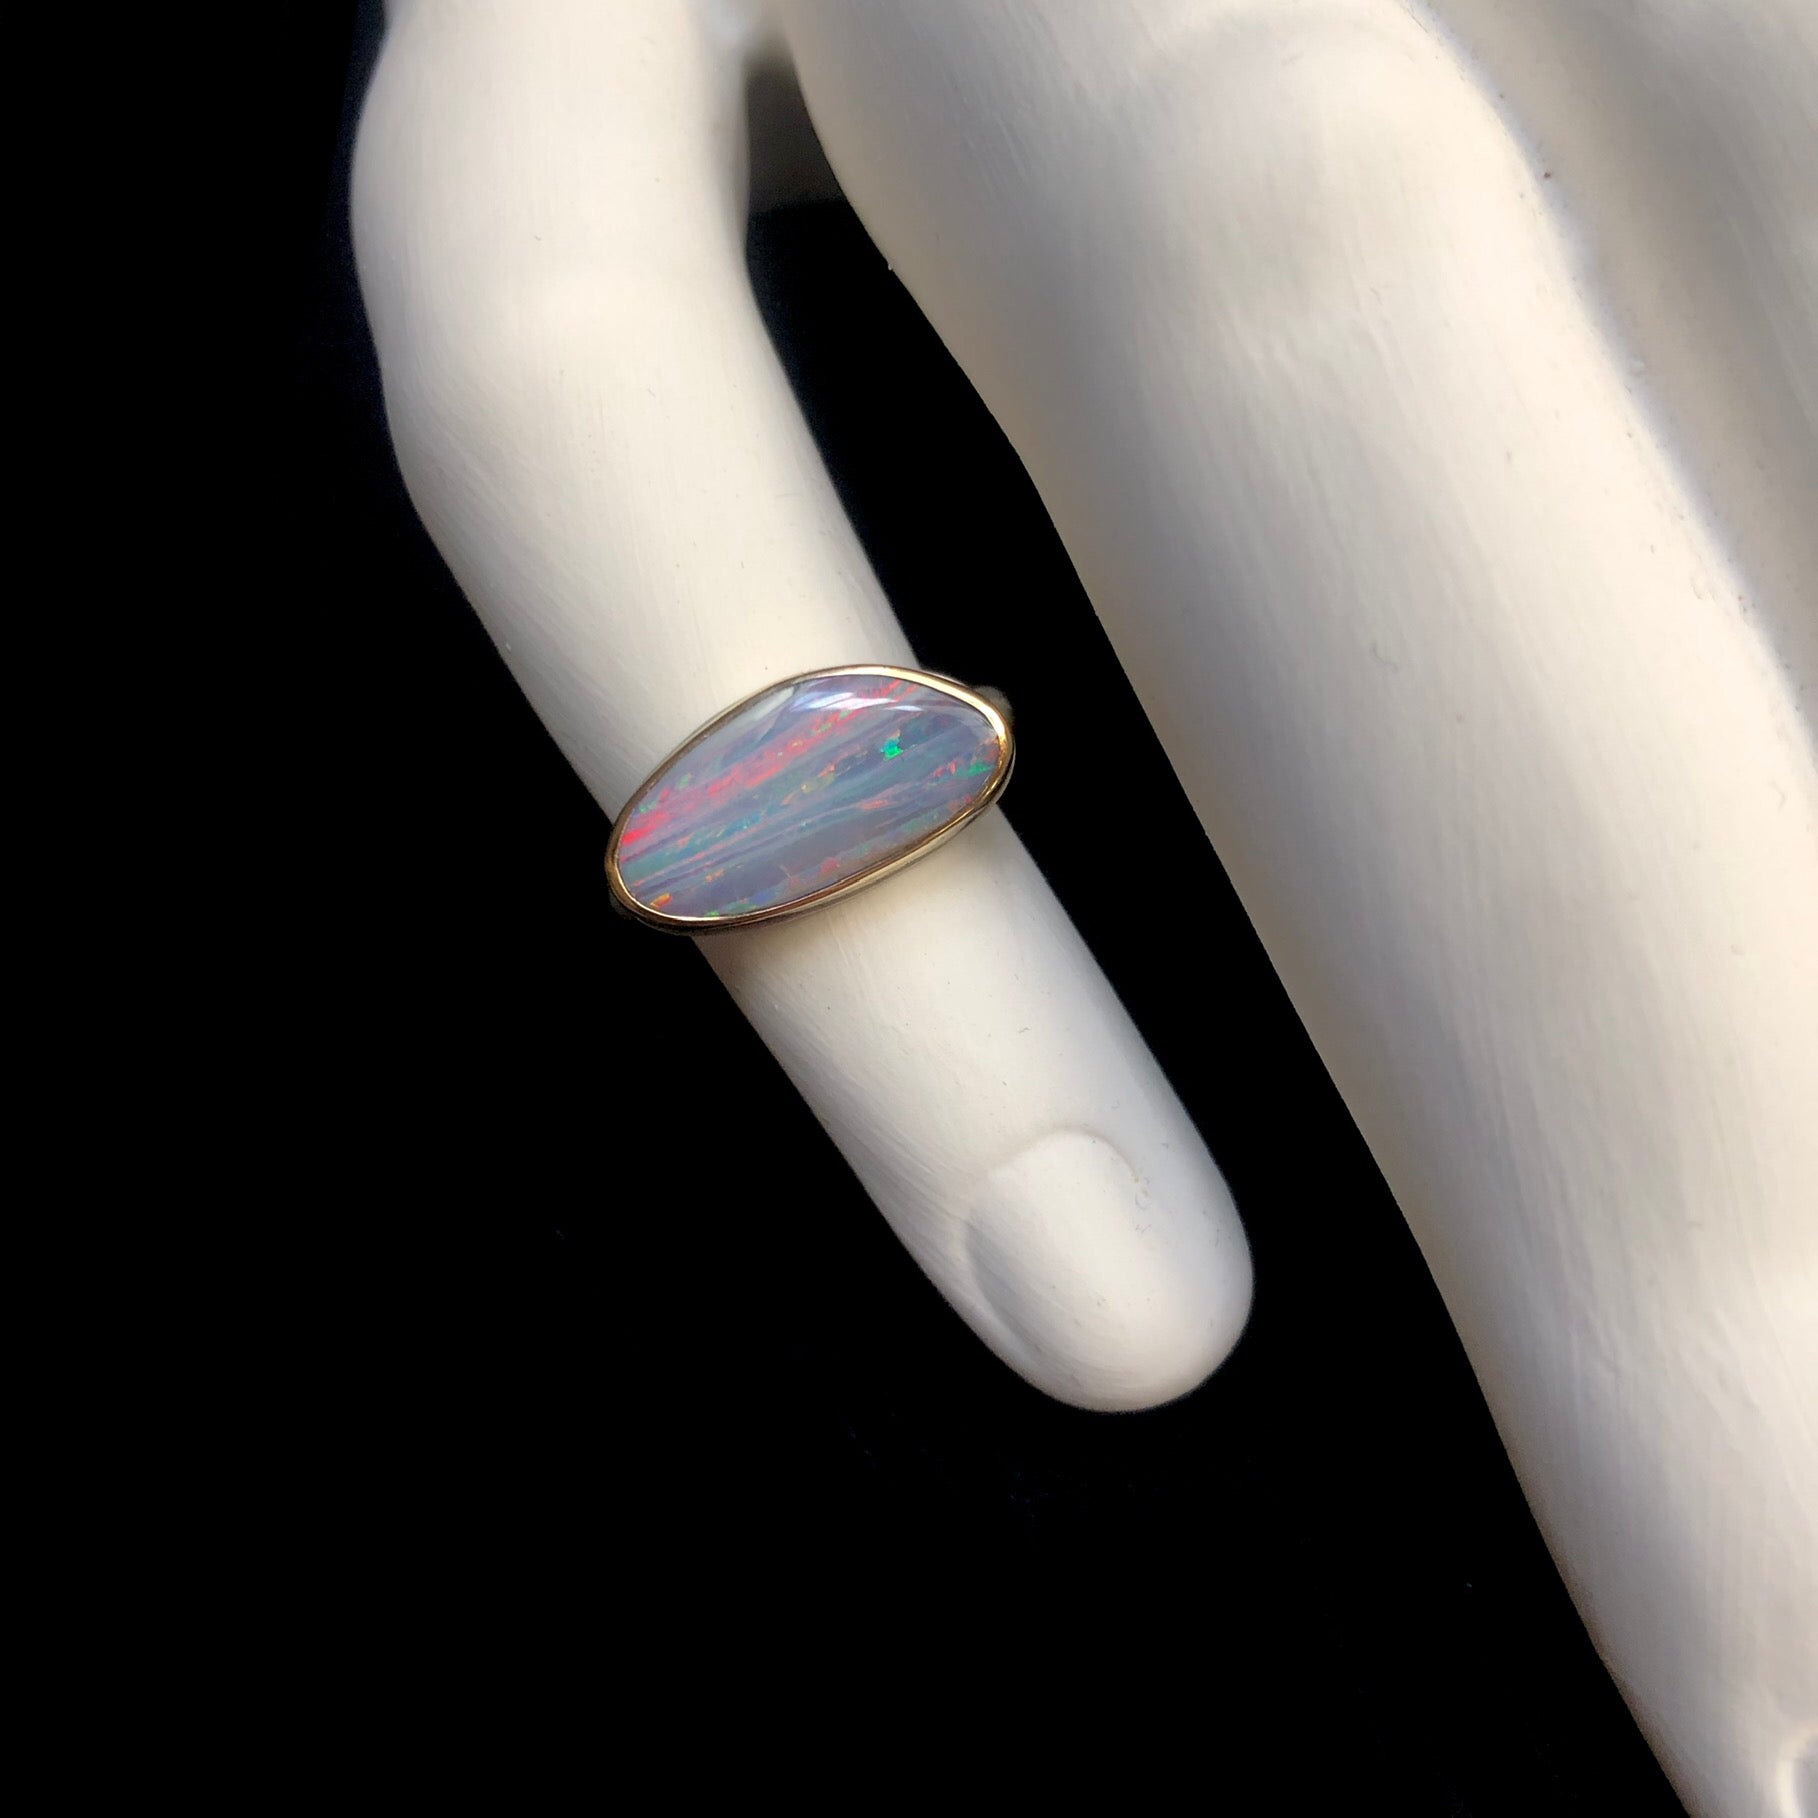 Lowly lit Boulder opal ring with smokey lilac grey overtones of color shown against white ceramic finger